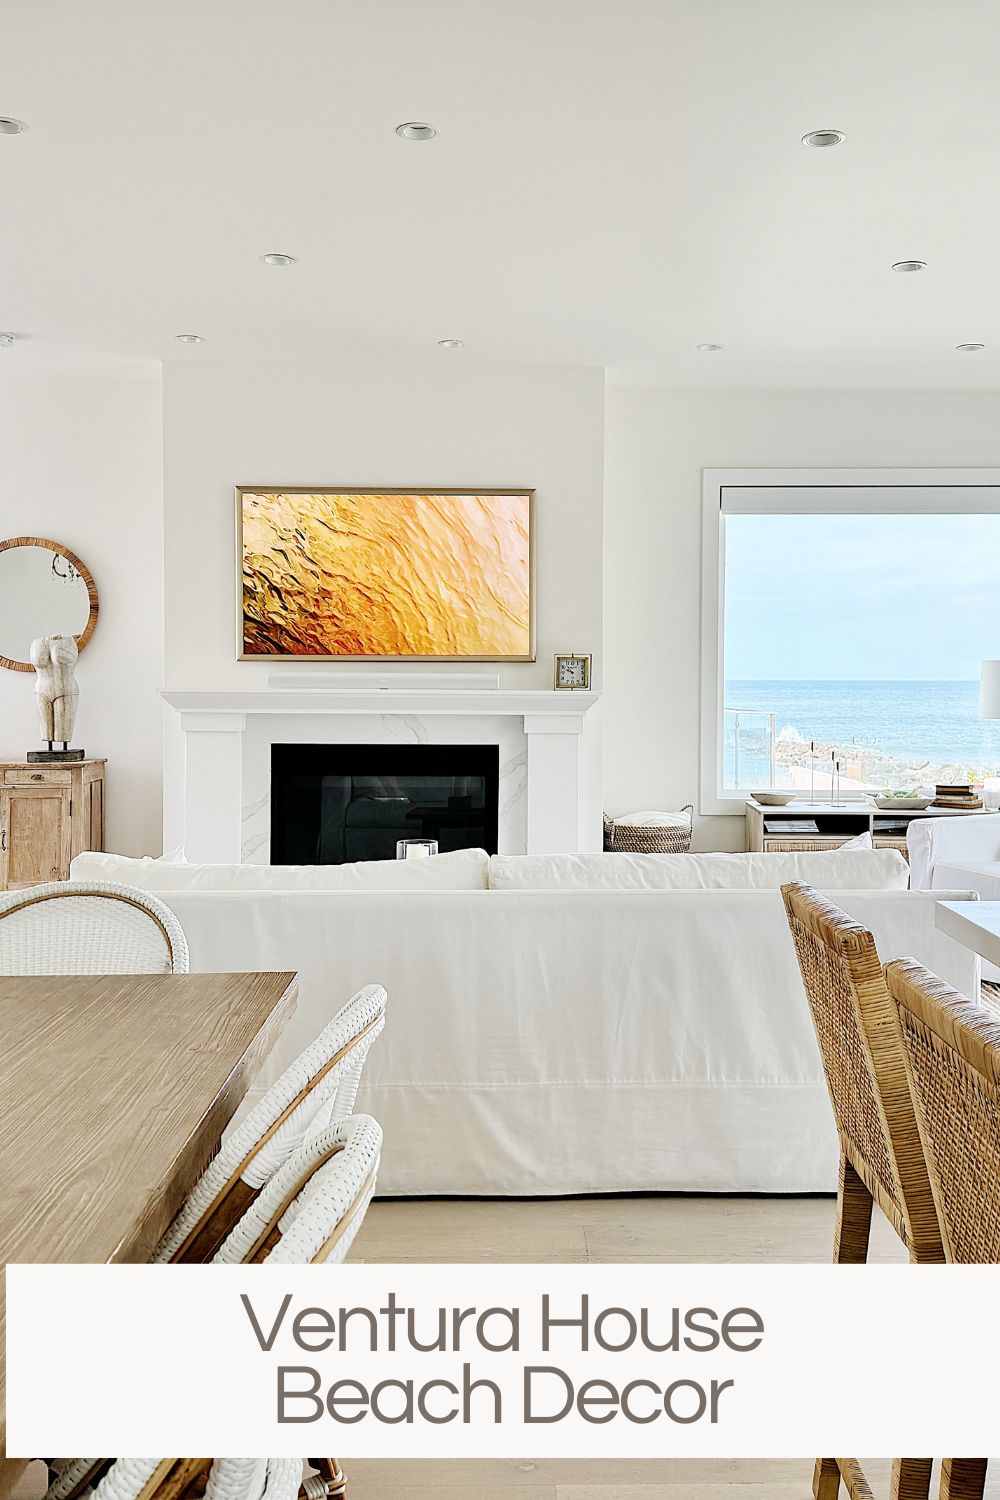 We have been enjoying our remodeled beach house for almost a year, and I wanted to share all of the Ventura House Beach Decor. Just tap a link on anything below.